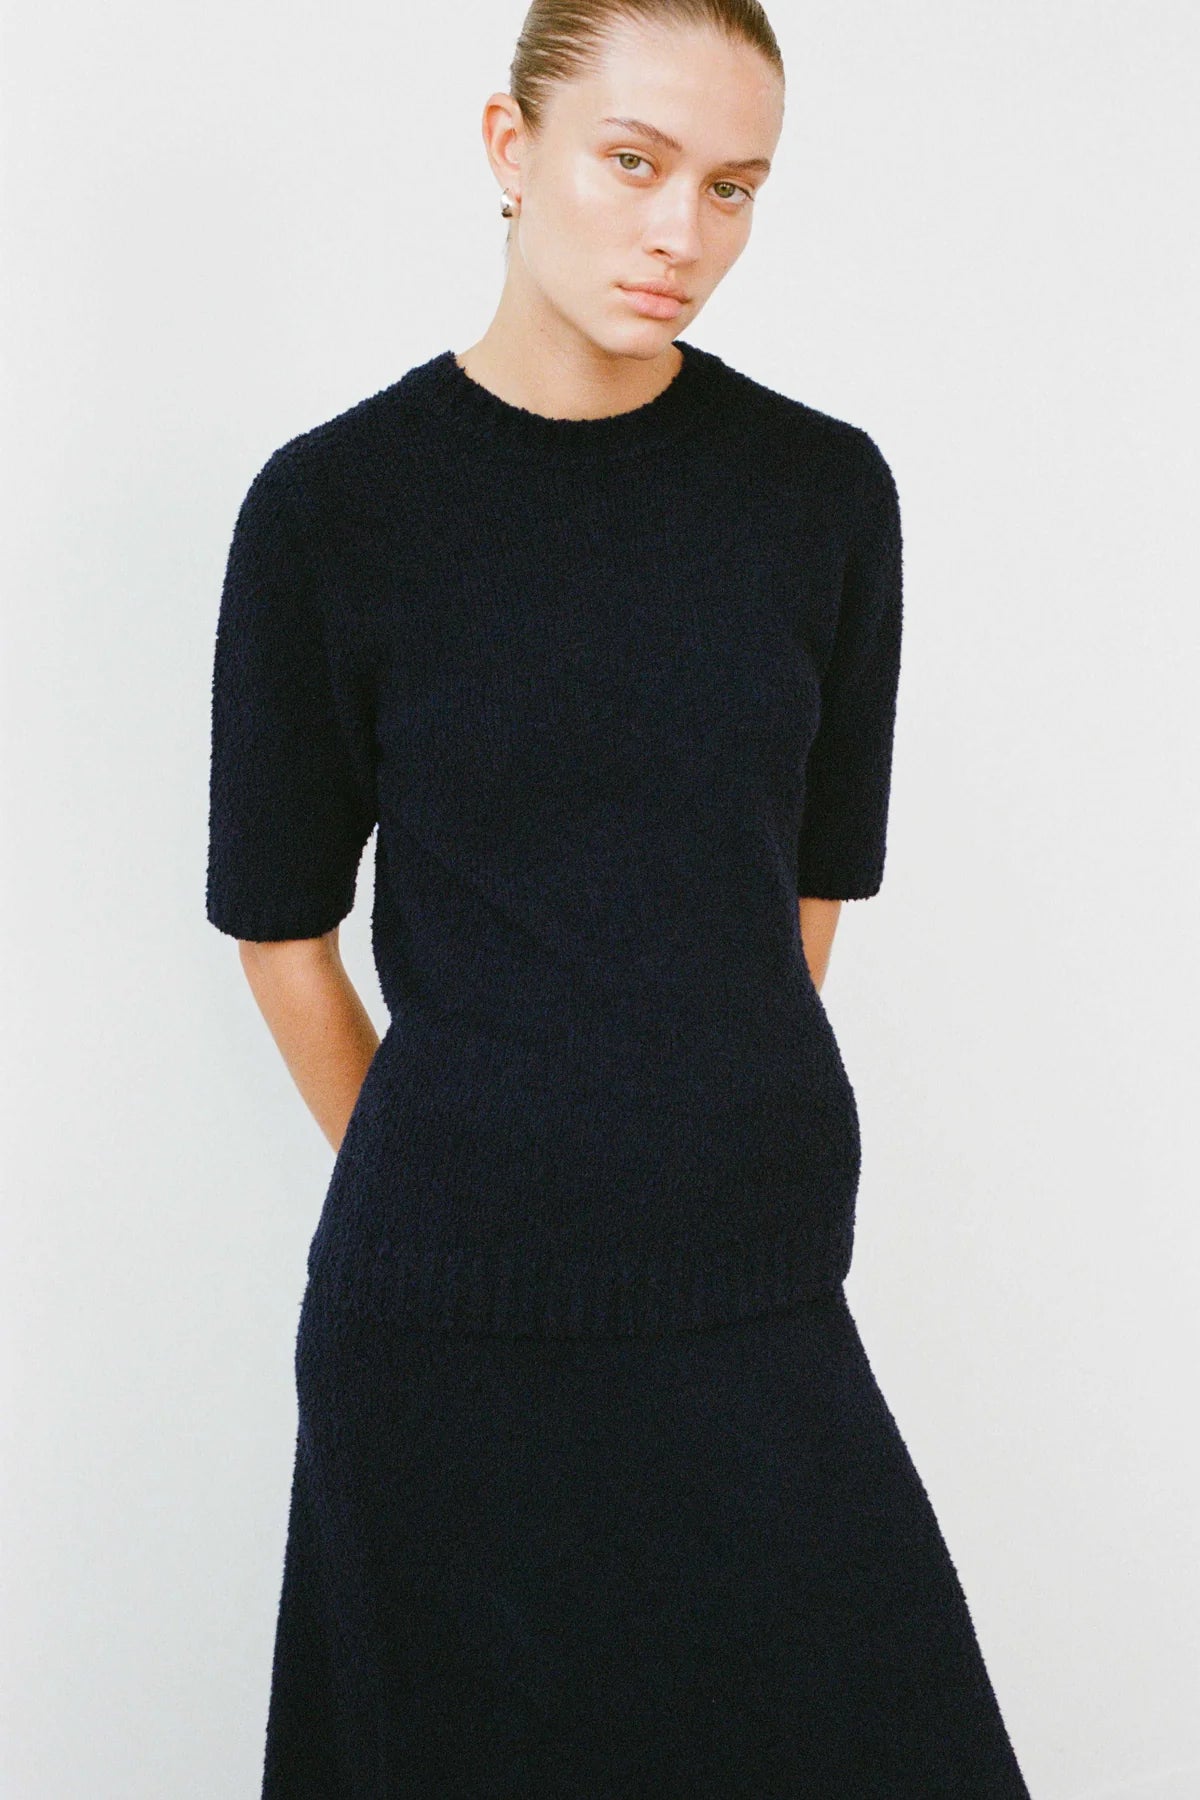 THE CELESTE TOP - NAVY  - FRIENDS WITH FRANK